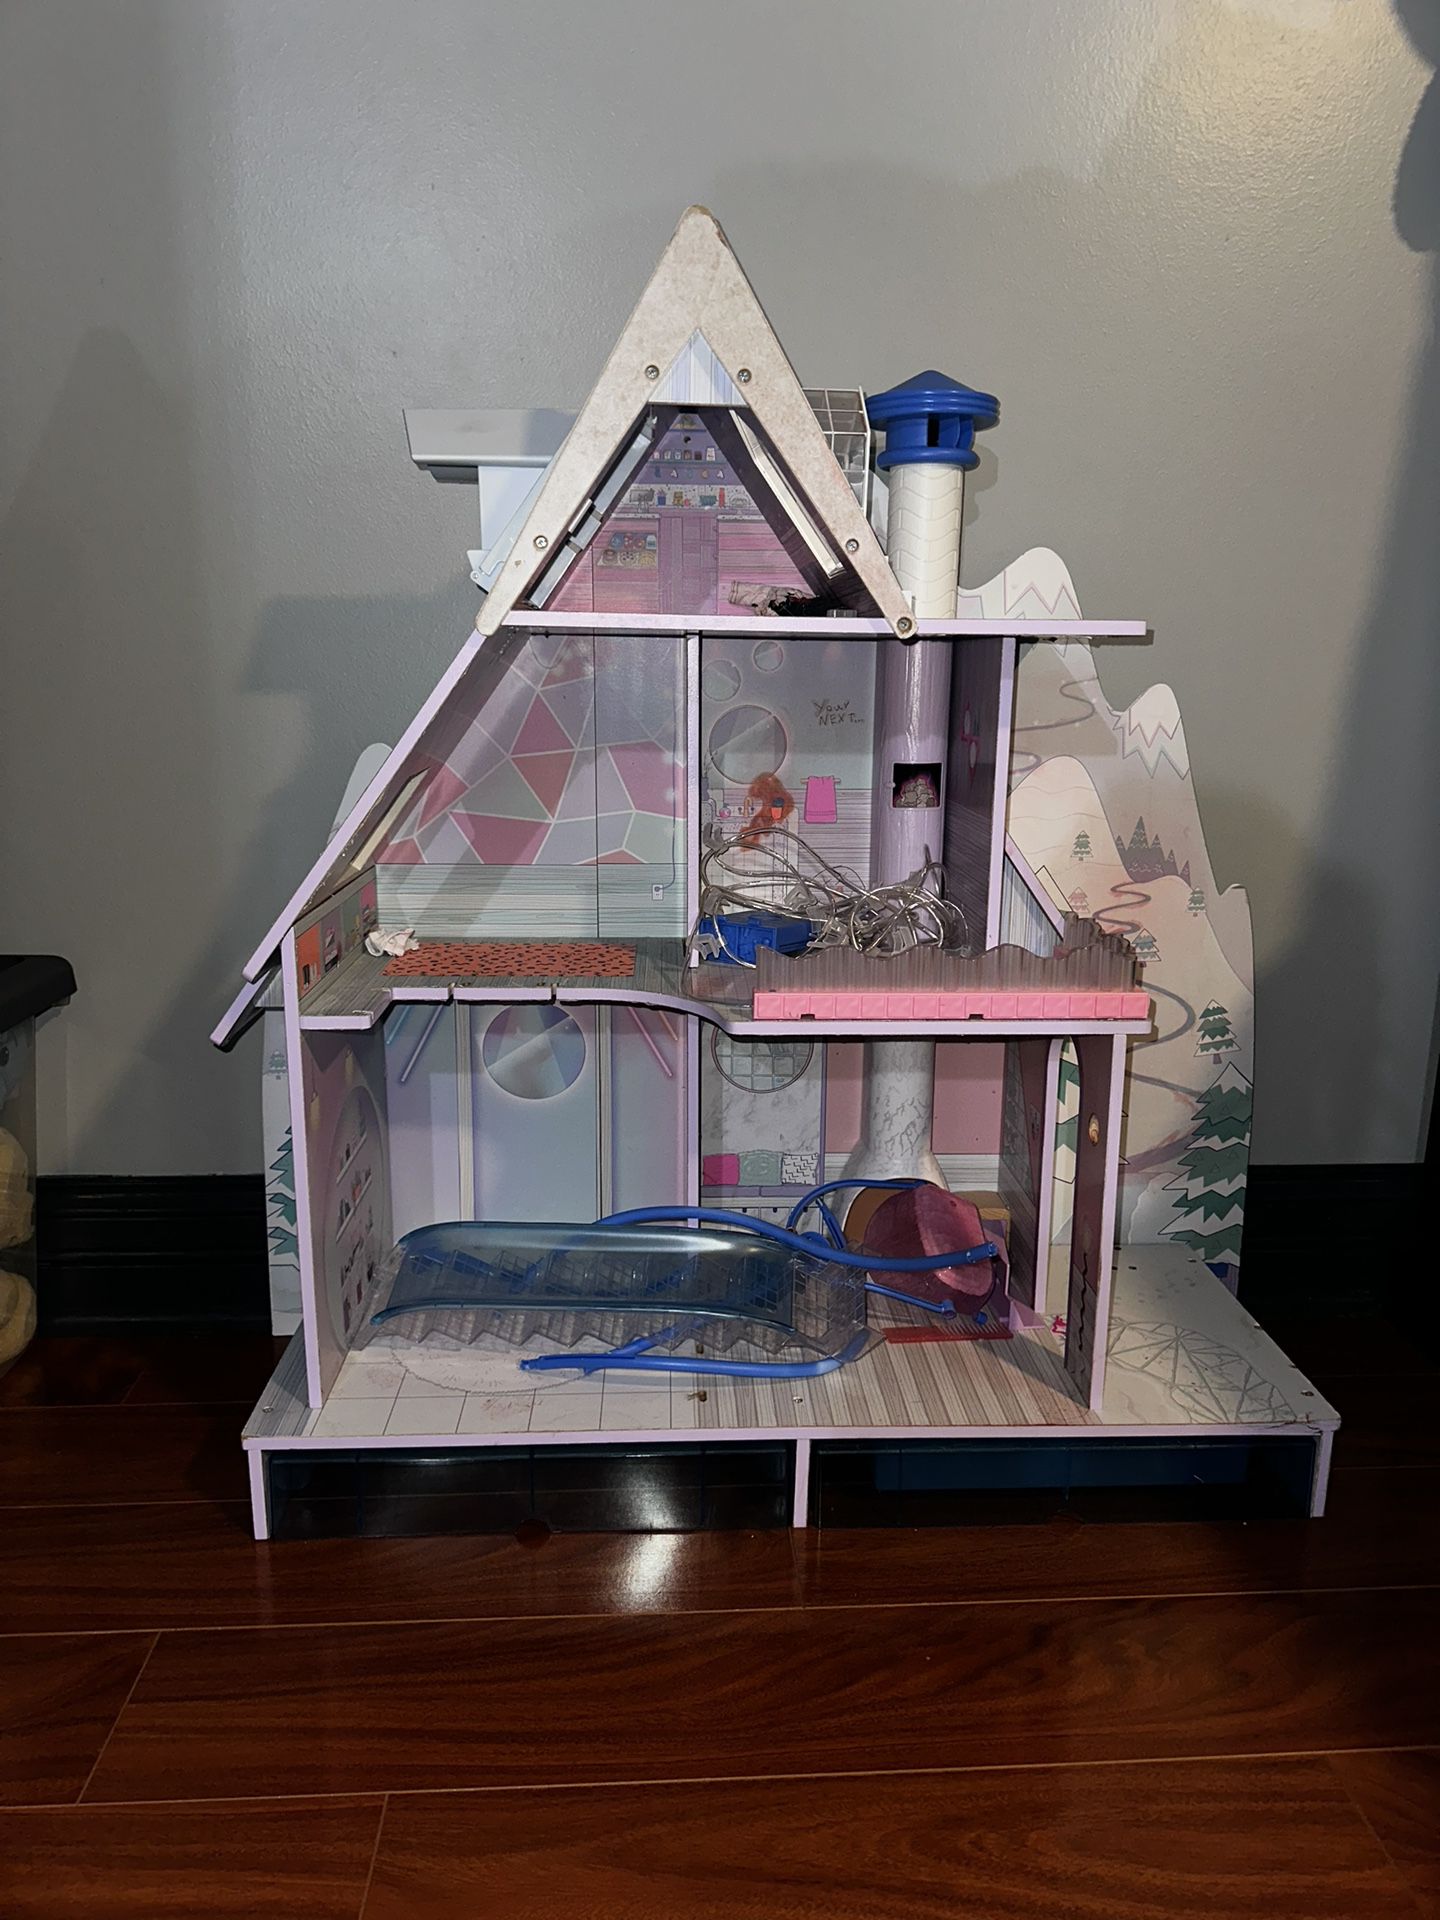 LOL Doll House Includes A Set Of Dolls